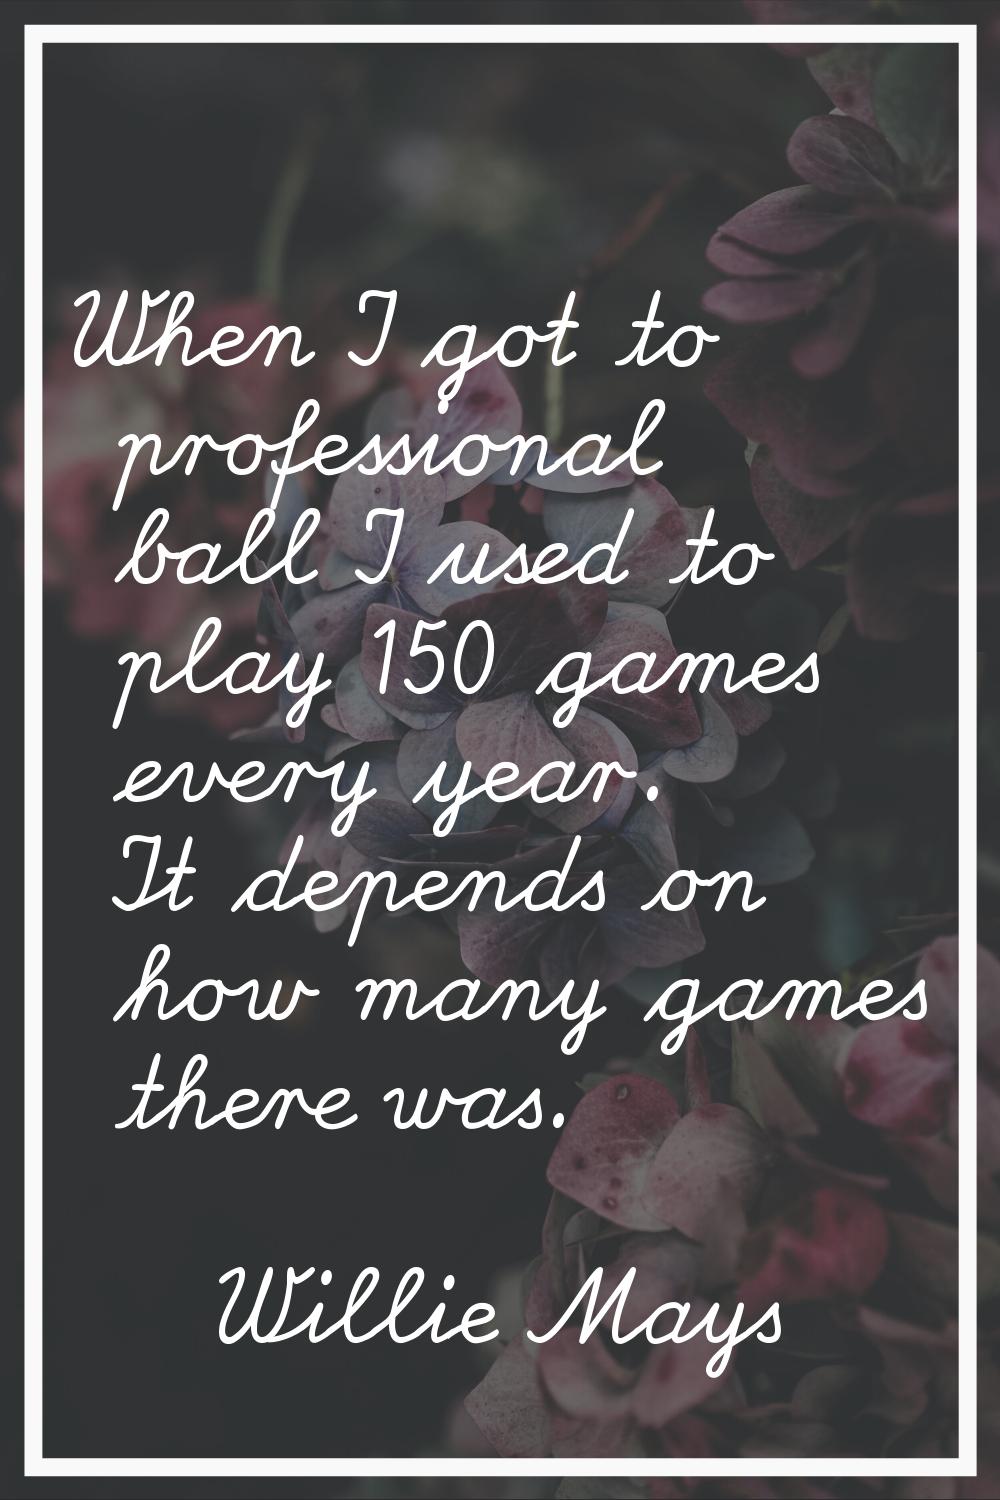 When I got to professional ball I used to play 150 games every year. It depends on how many games t